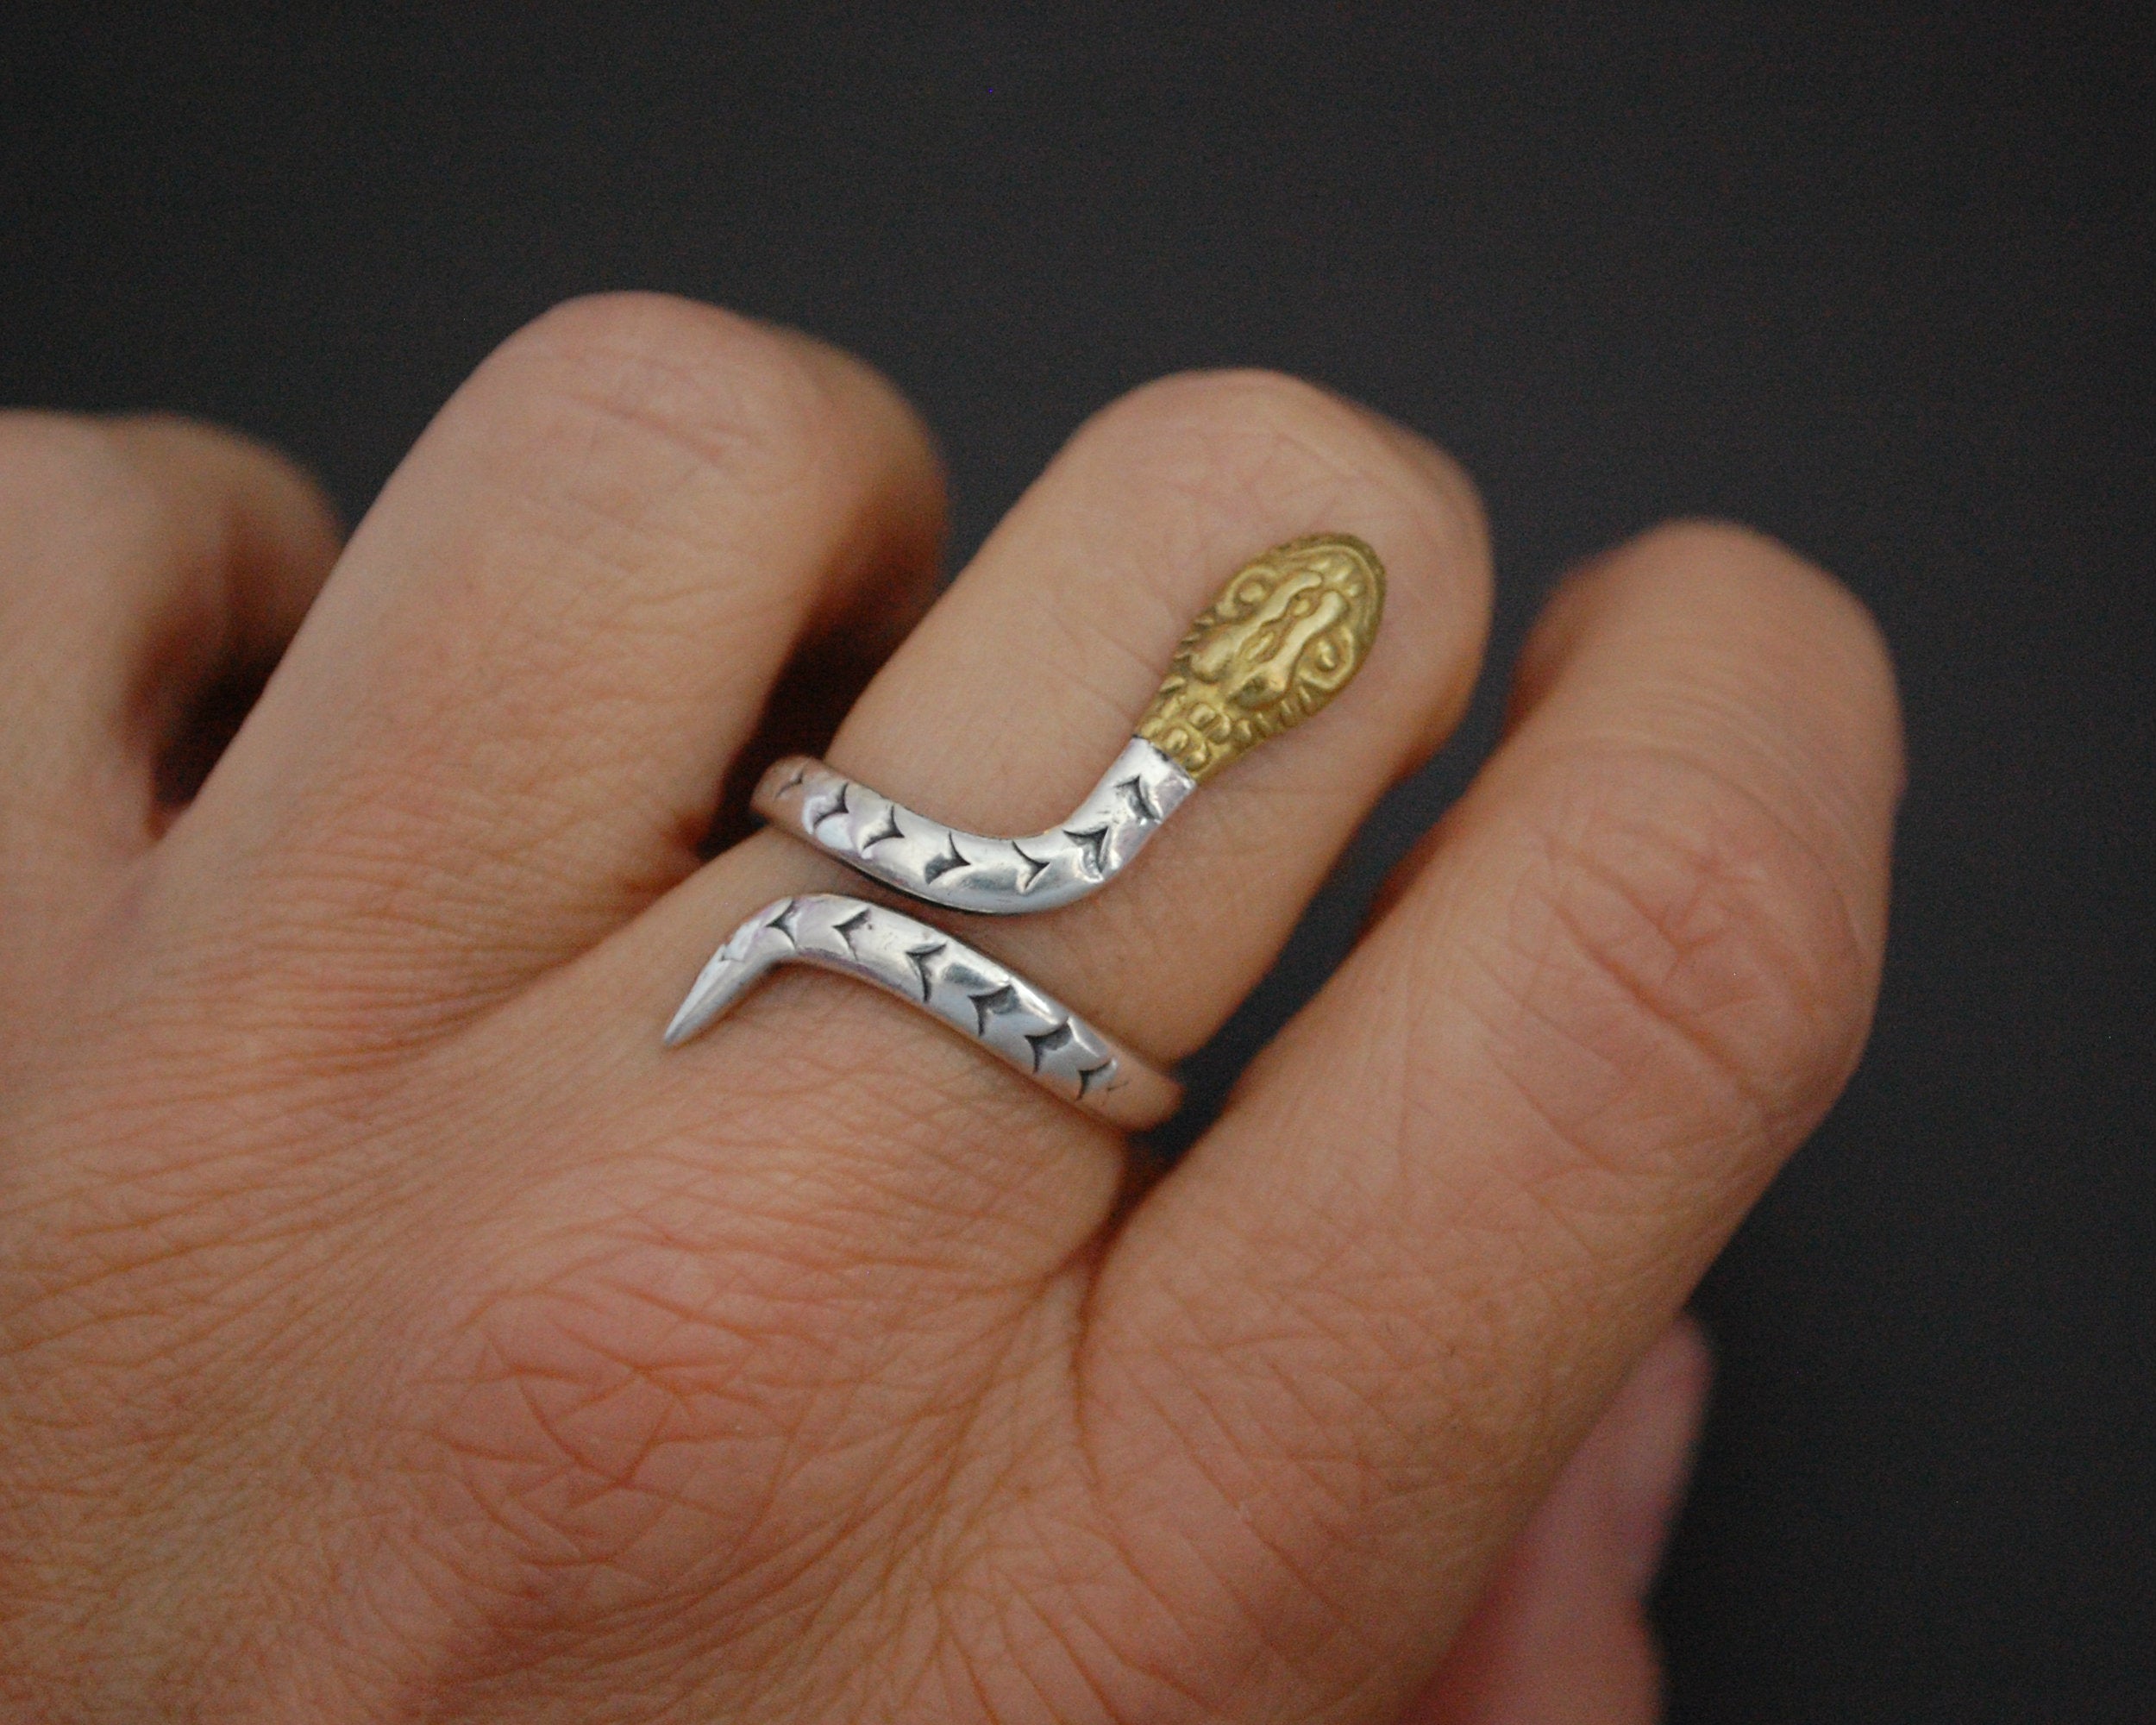 Mexican Snake Ring with Brass Head - Size 6